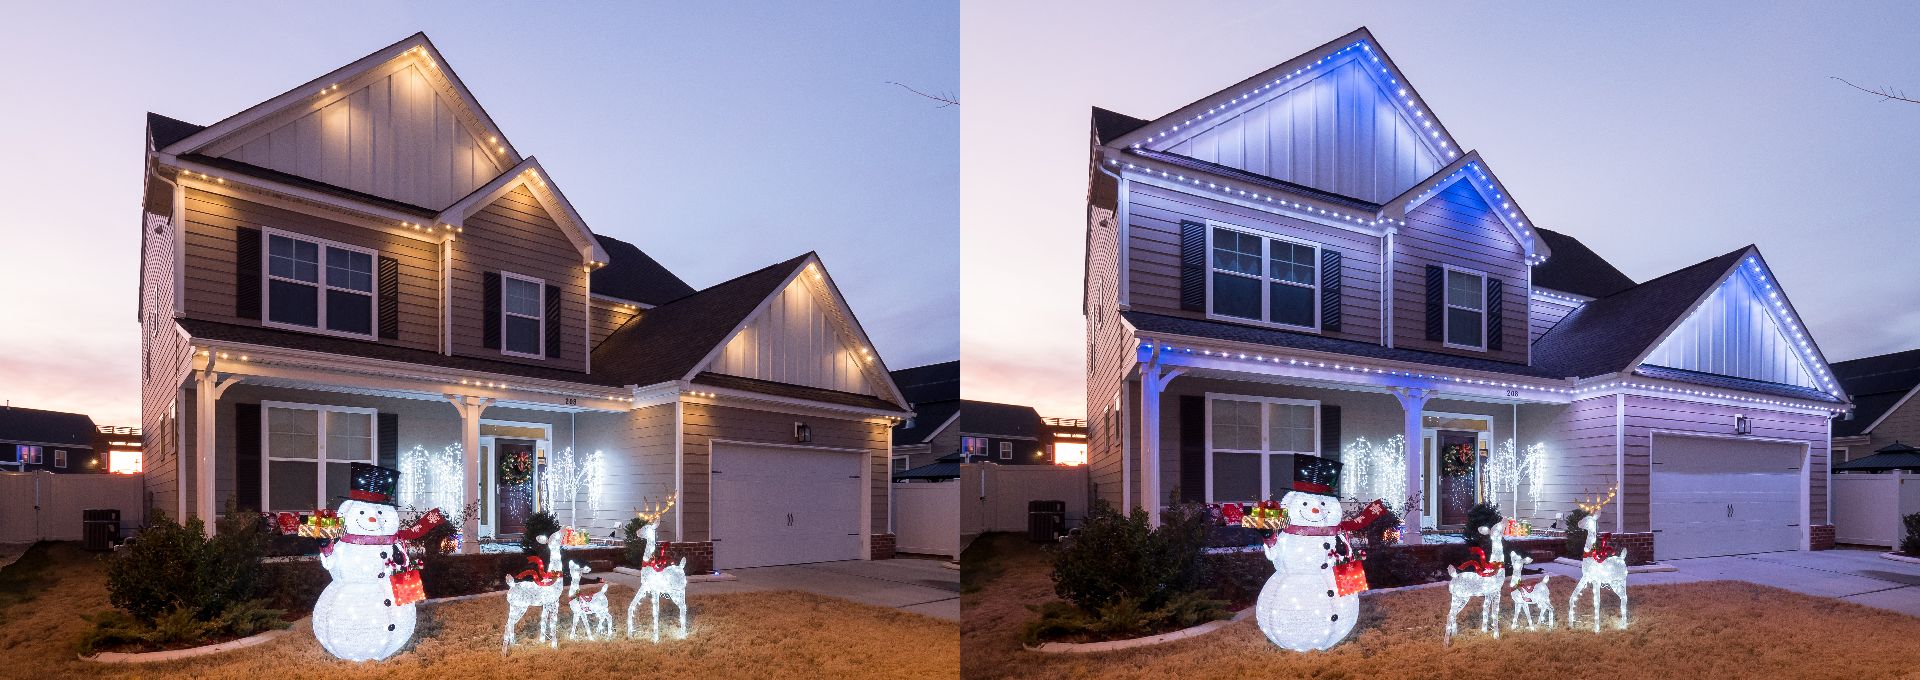 different holiday lighting options